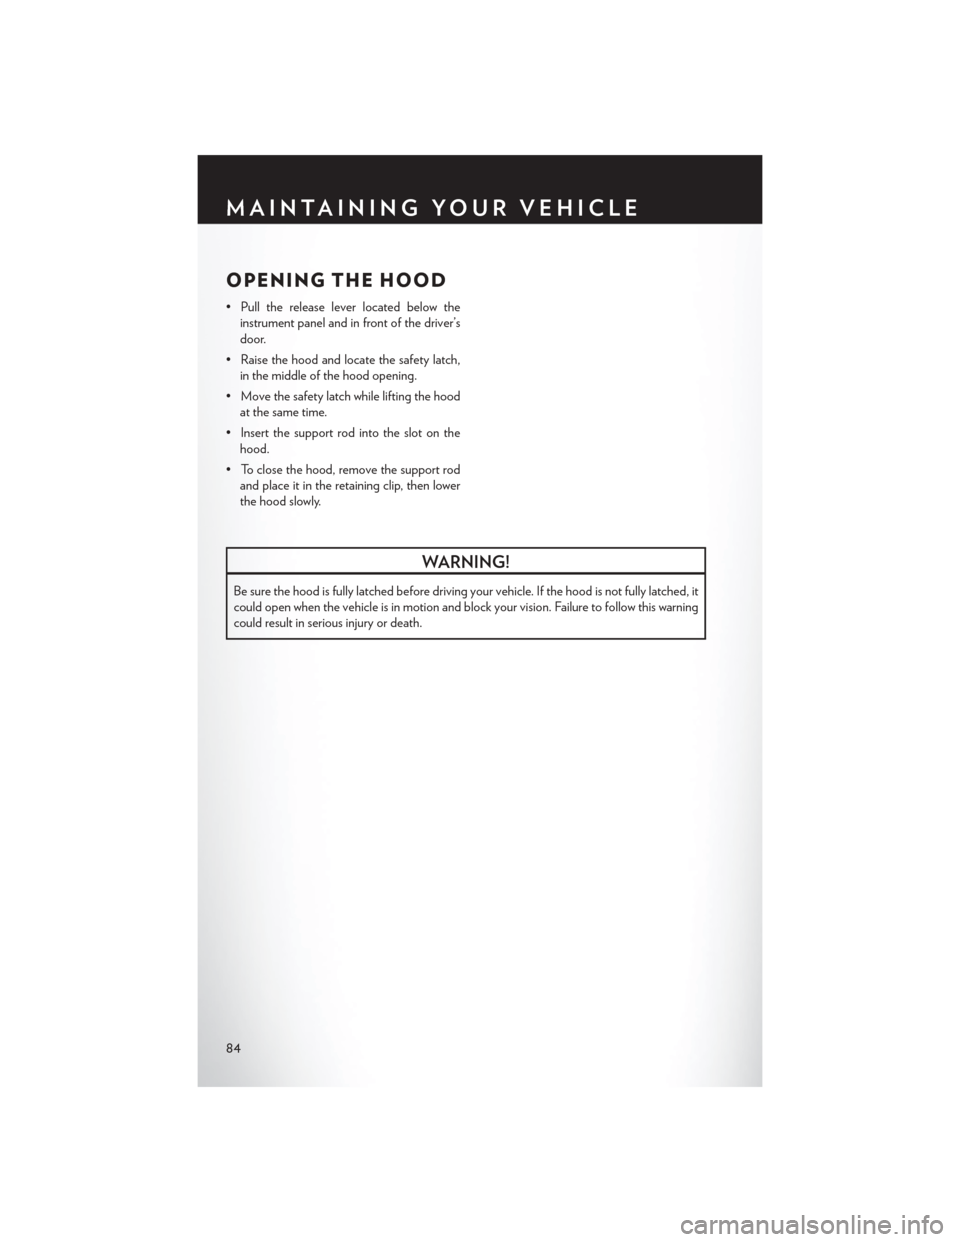 CHRYSLER 200 2013 1.G Owners Manual OPENING THE HOOD
• Pull the release lever located below theinstrument panel and in front of the driver’s
door.
• Raise the hood and locate the safety latch, in the middle of the hood opening.
�